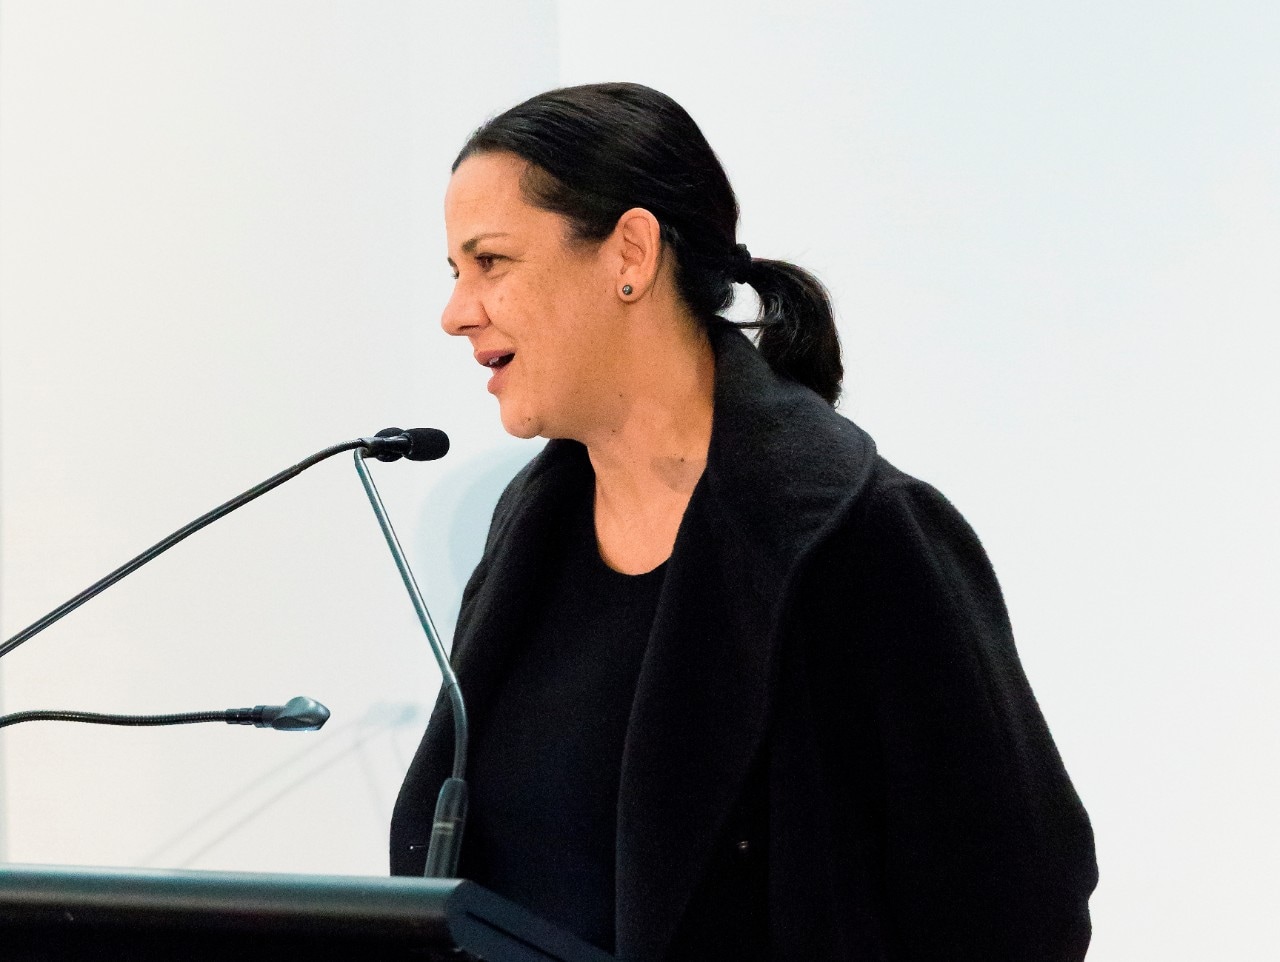 A photograph of Hetti Perkins speaking at a microphone.